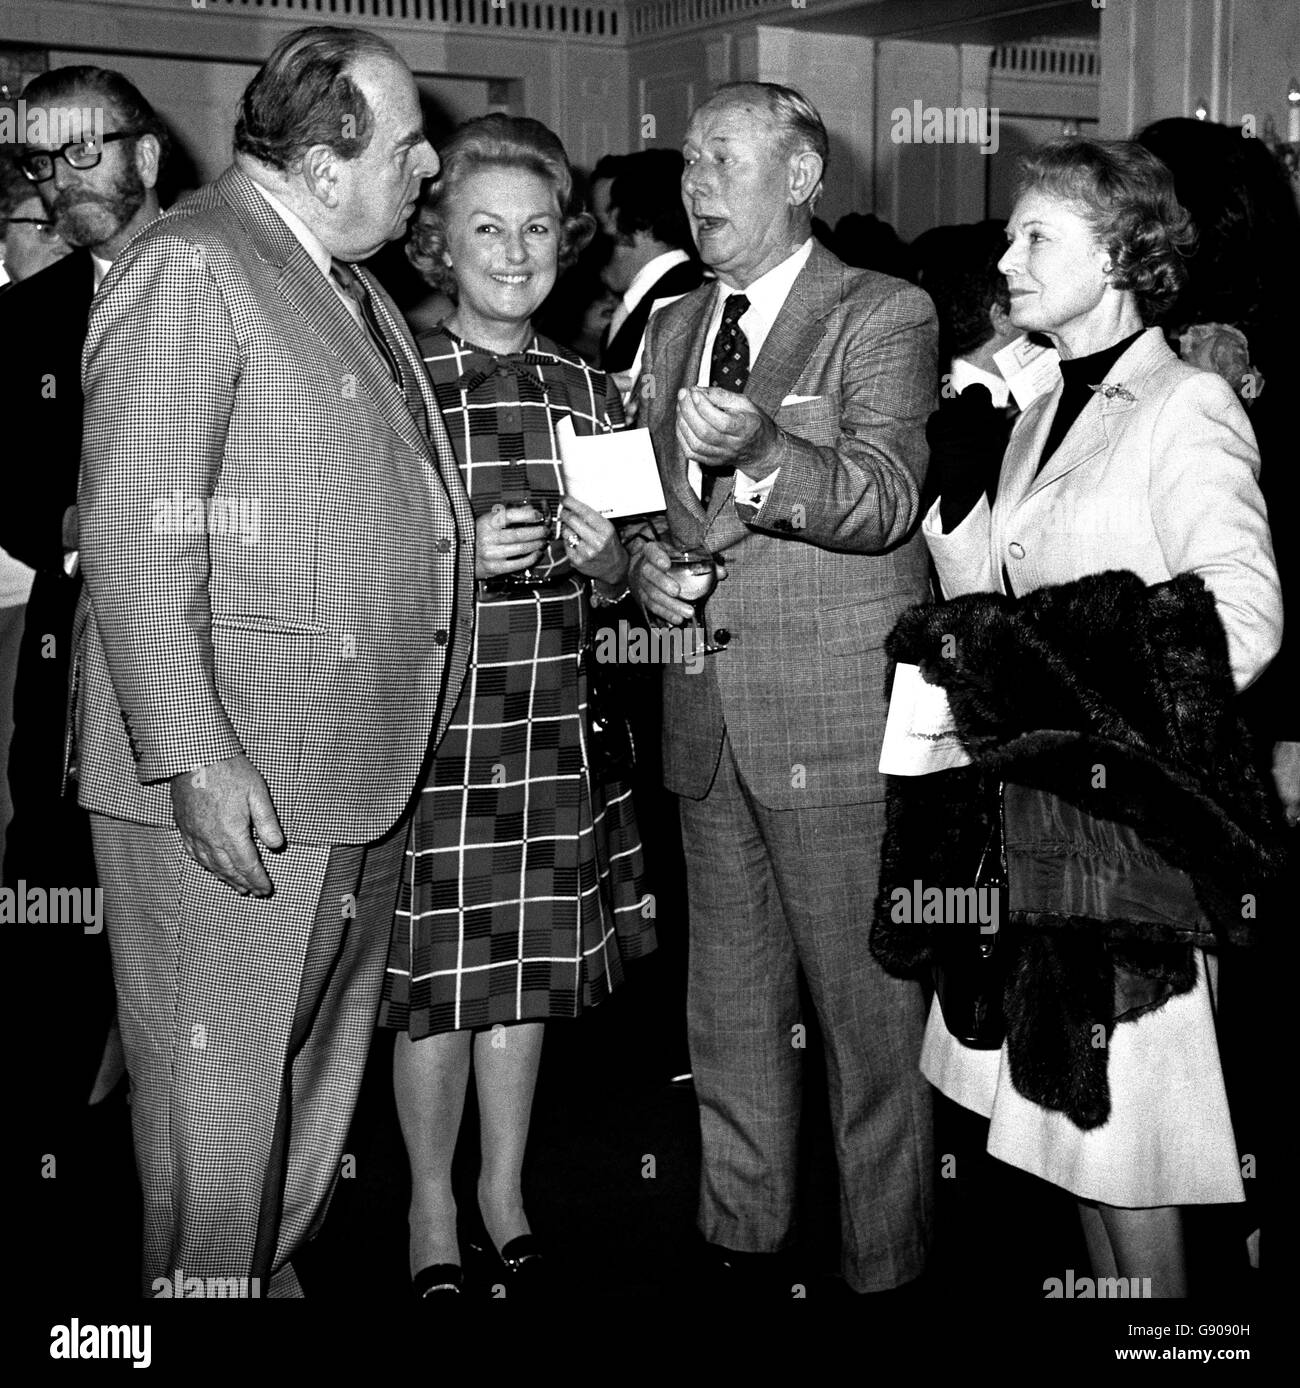 (left to right) Actor, dramatist and raconteur, Robert Morley; Yvonne, wife of Richard 'Mr Pastry' Hearne, and Dame Anna Neagle. The lunceon honours Mr Morley, his daughter-in-law Margaret, and his son Sheridan Morley. Robert is the author of Morley Marvels. Margaret, authoress of A Friend In Need, and Sheridan, author of Oscar Wilde, and Marlene Dietrich. Stock Photo